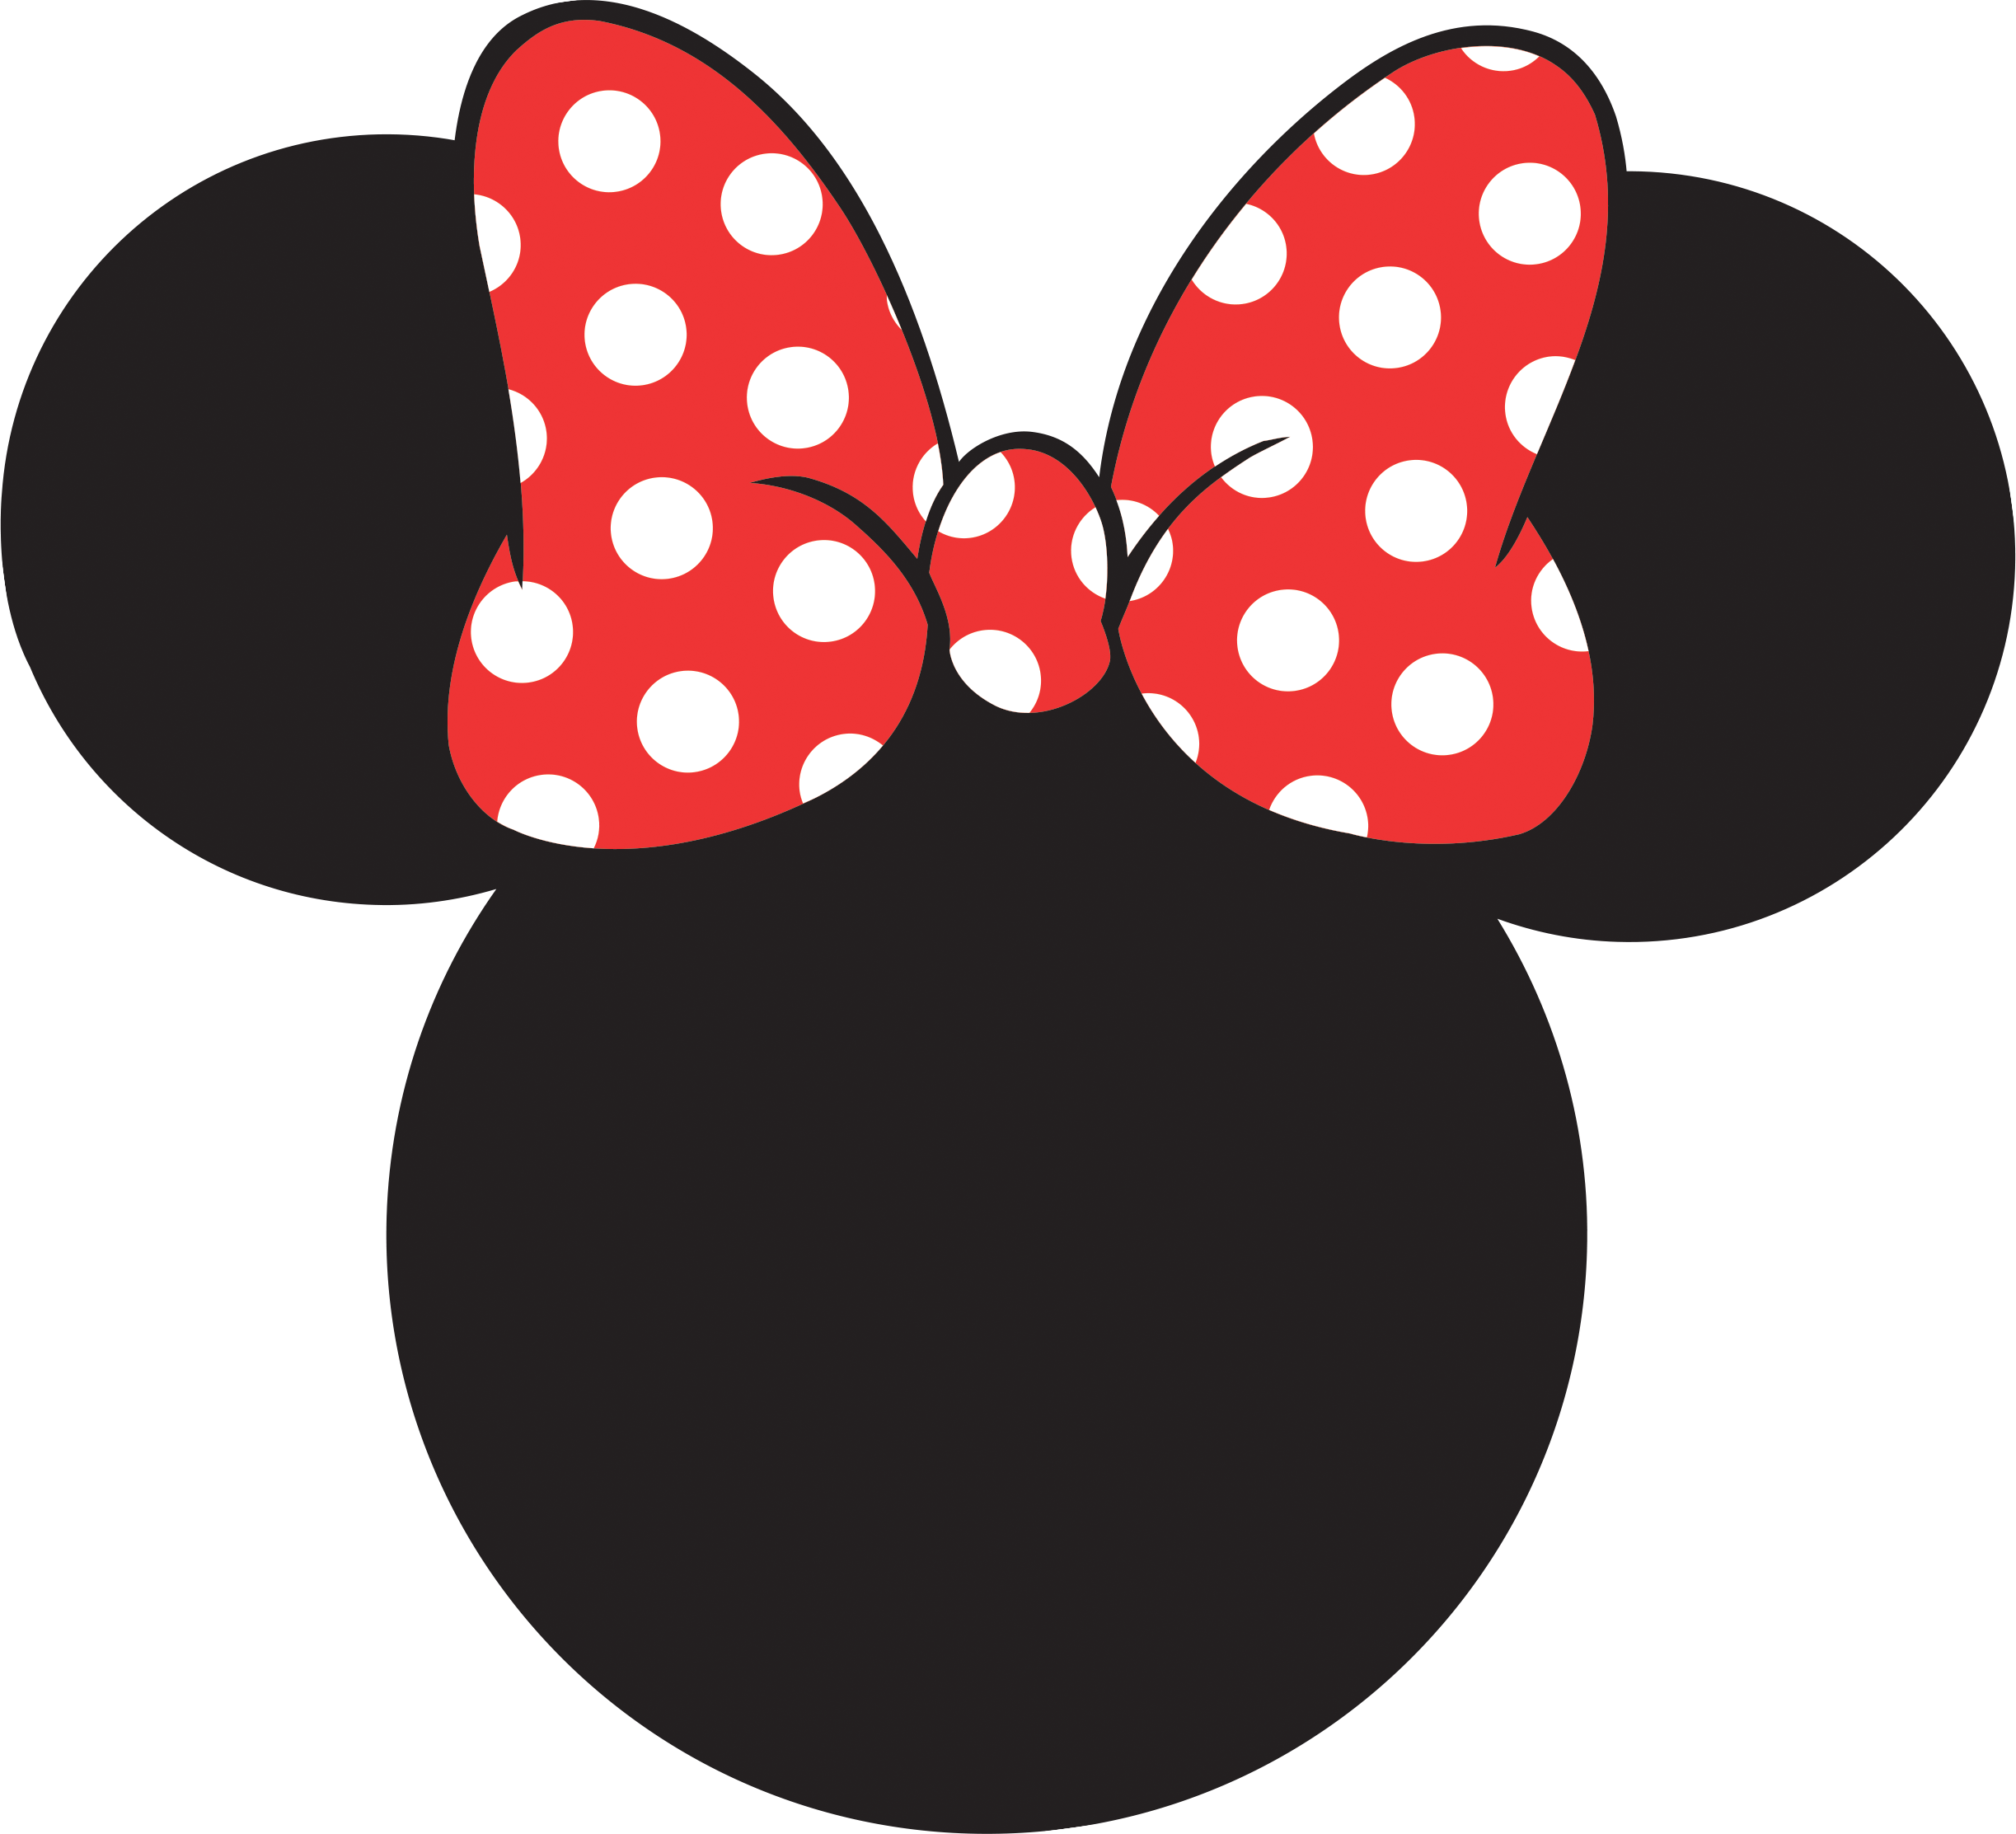 Minnie Mouse Mickey Mouse Donald Duck Clip art - minnie mouse png